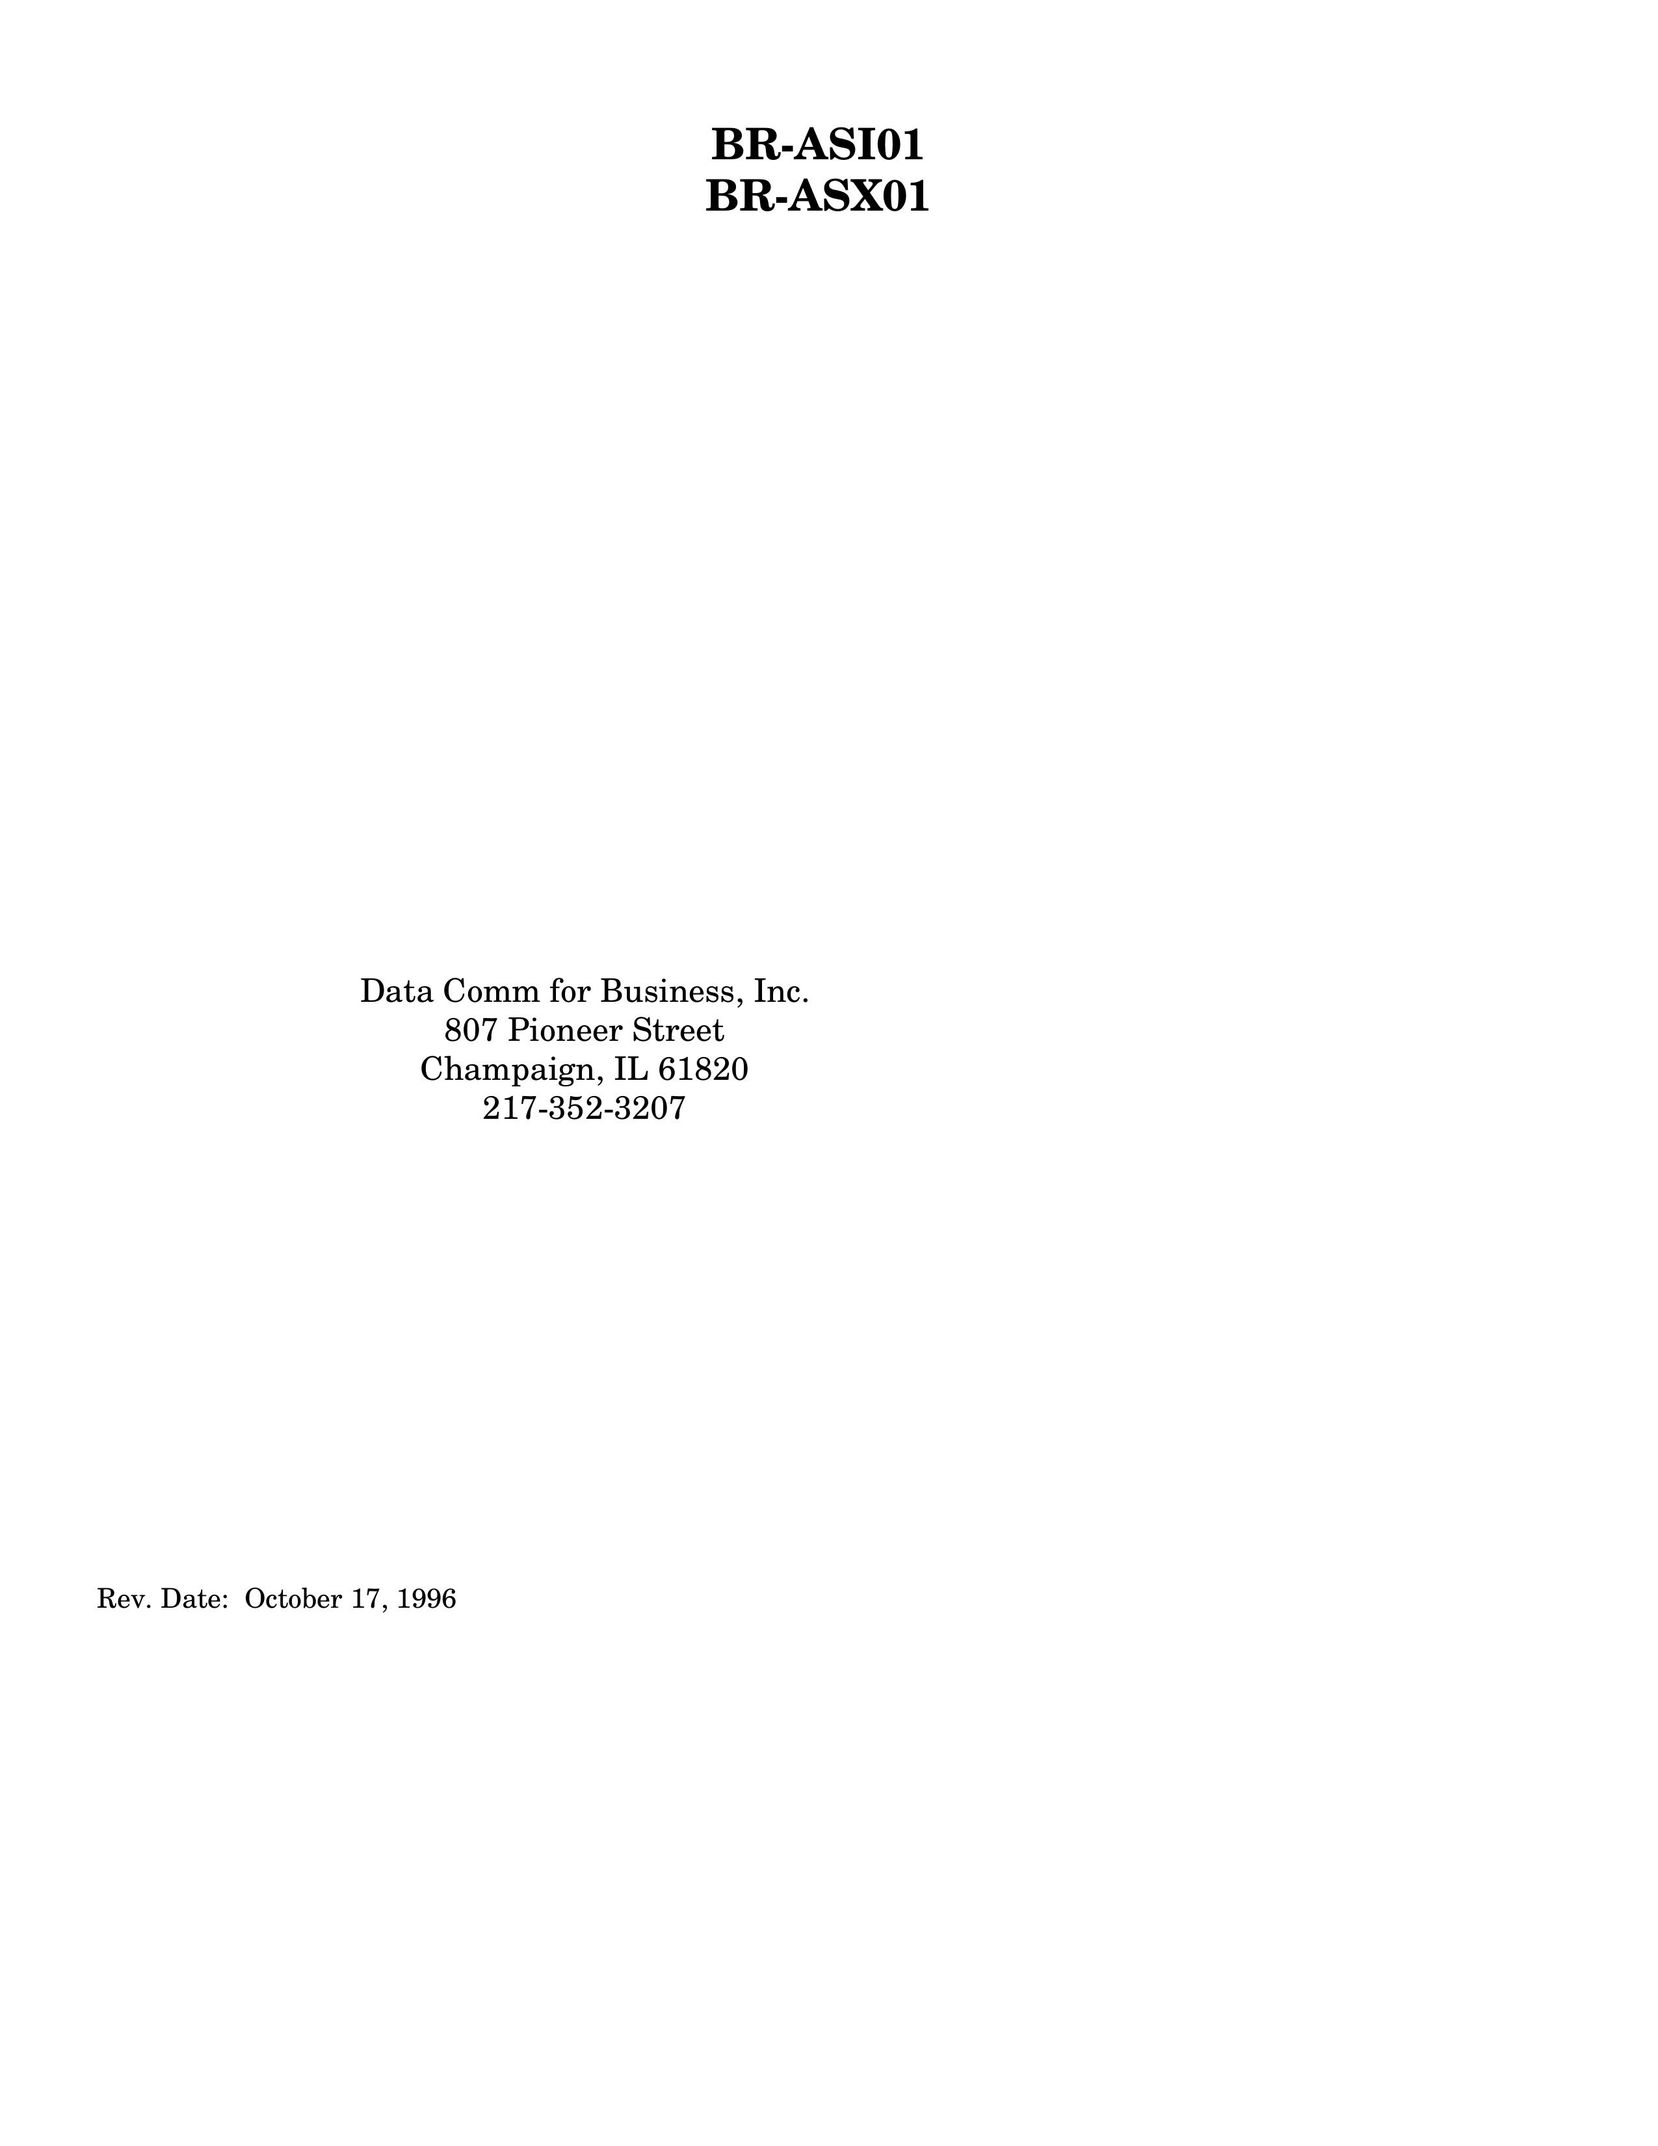 RAD Data comm BR-ASI01 Network Router User Manual